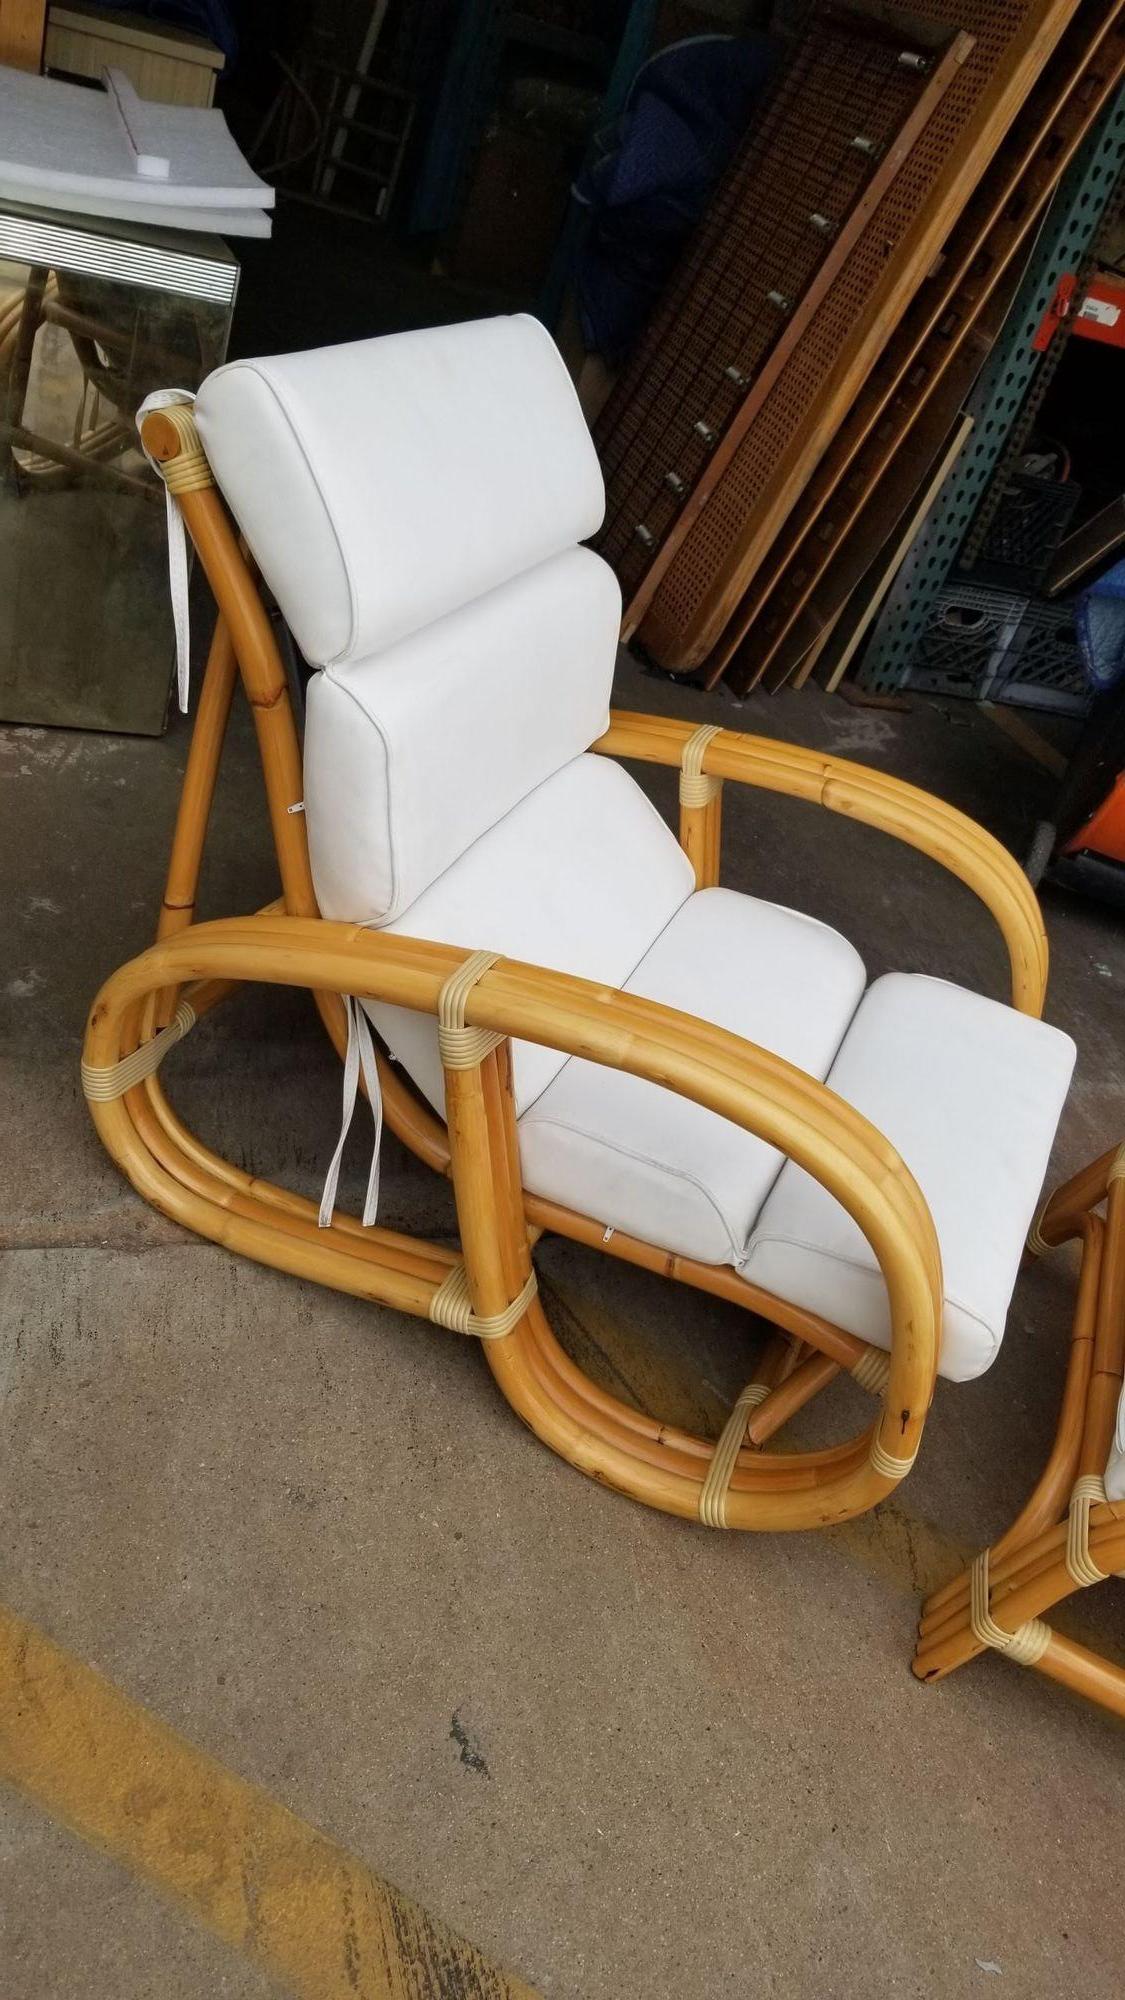 This immaculately restored three-strand rattan lounge chair and matching ottoman showcase the craftsmanship of a bygone era. The intricate rattan evokes a sense of nostalgia, while the restoration brings new life to the piece. With its elegant